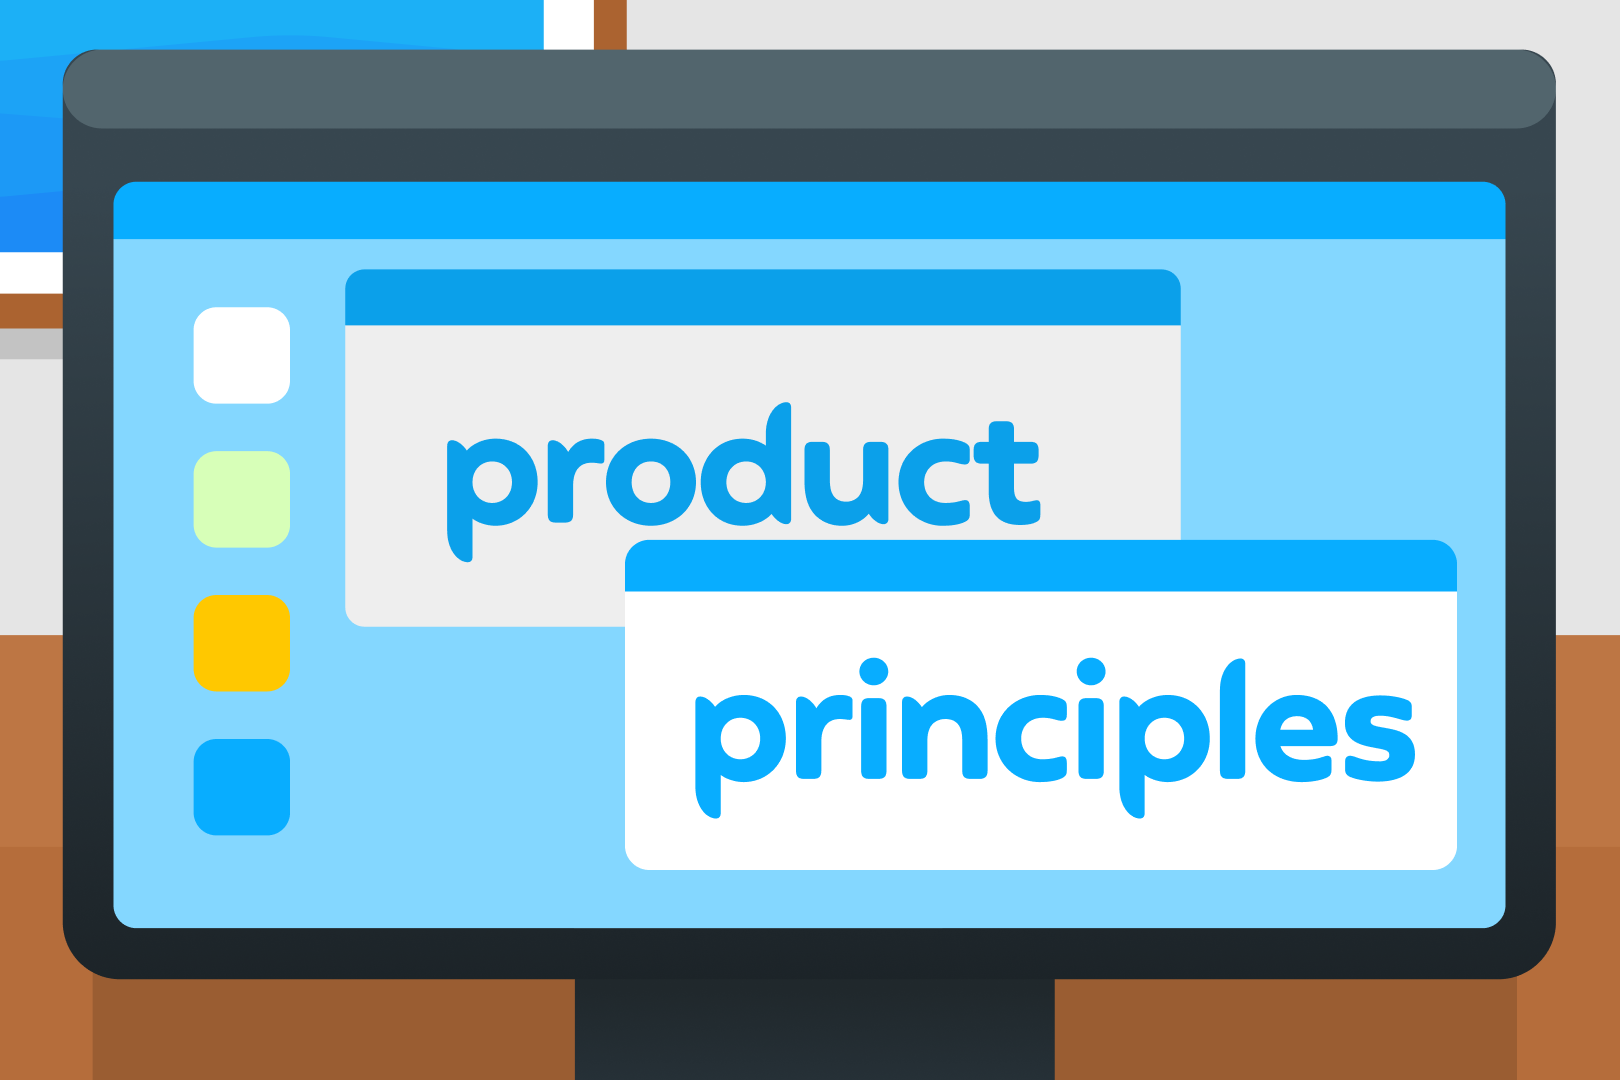 3 principles our VP of Product swears by